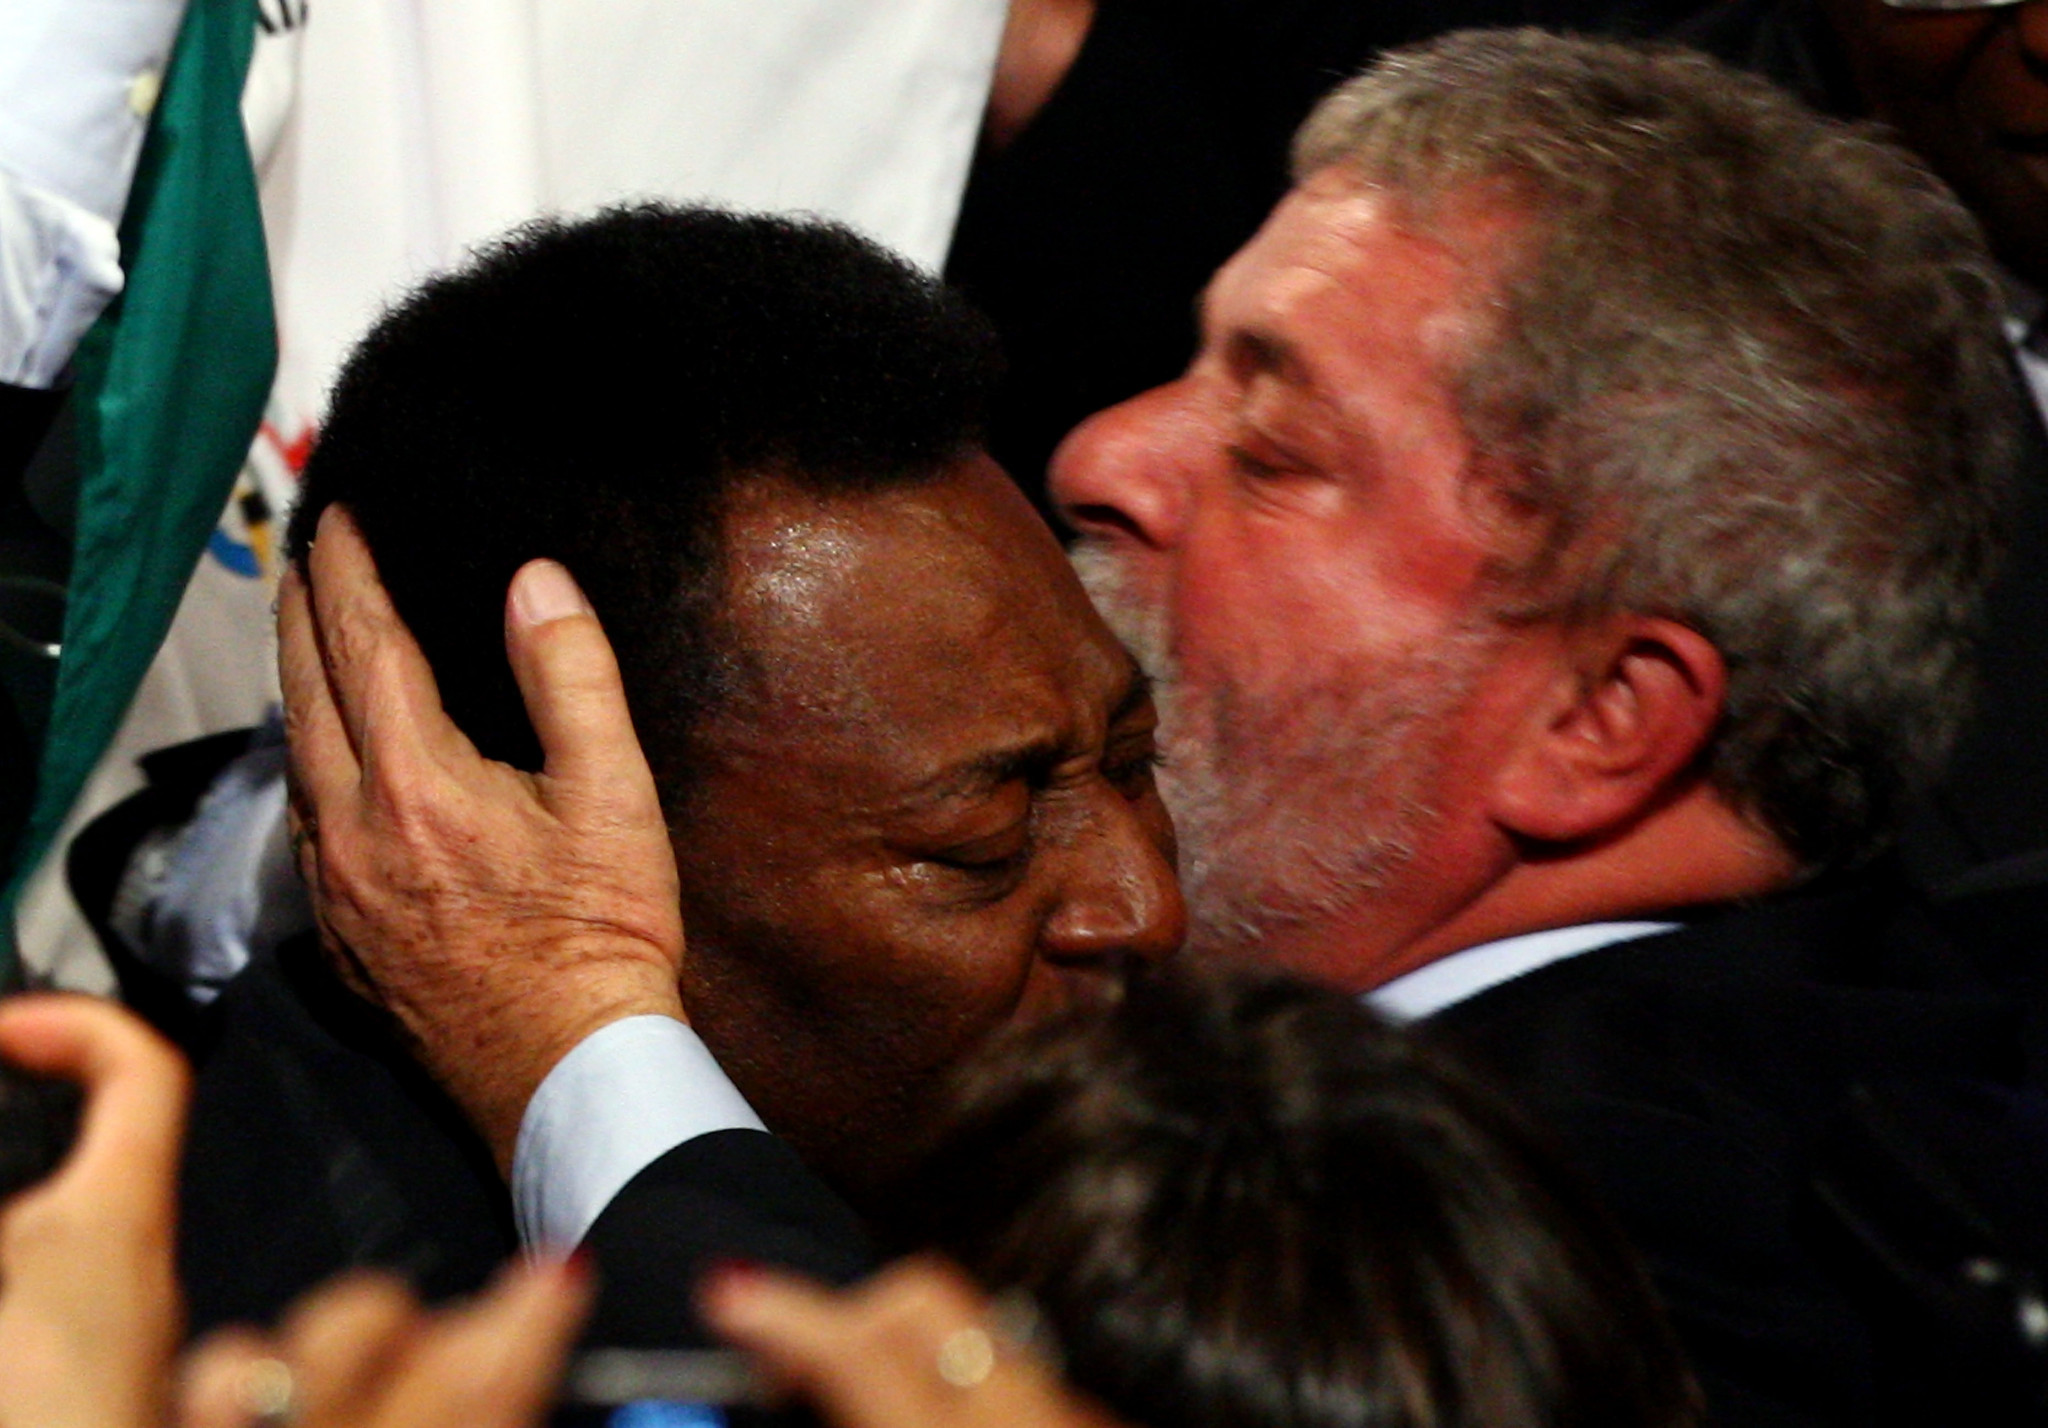 Pelé is hugged by Lula da Silva in Copenhagen in 2009 after it was announced that Rio de Janeiro had won its bid to host the 2016 Olympic and Paralympic Games ©Getty Images